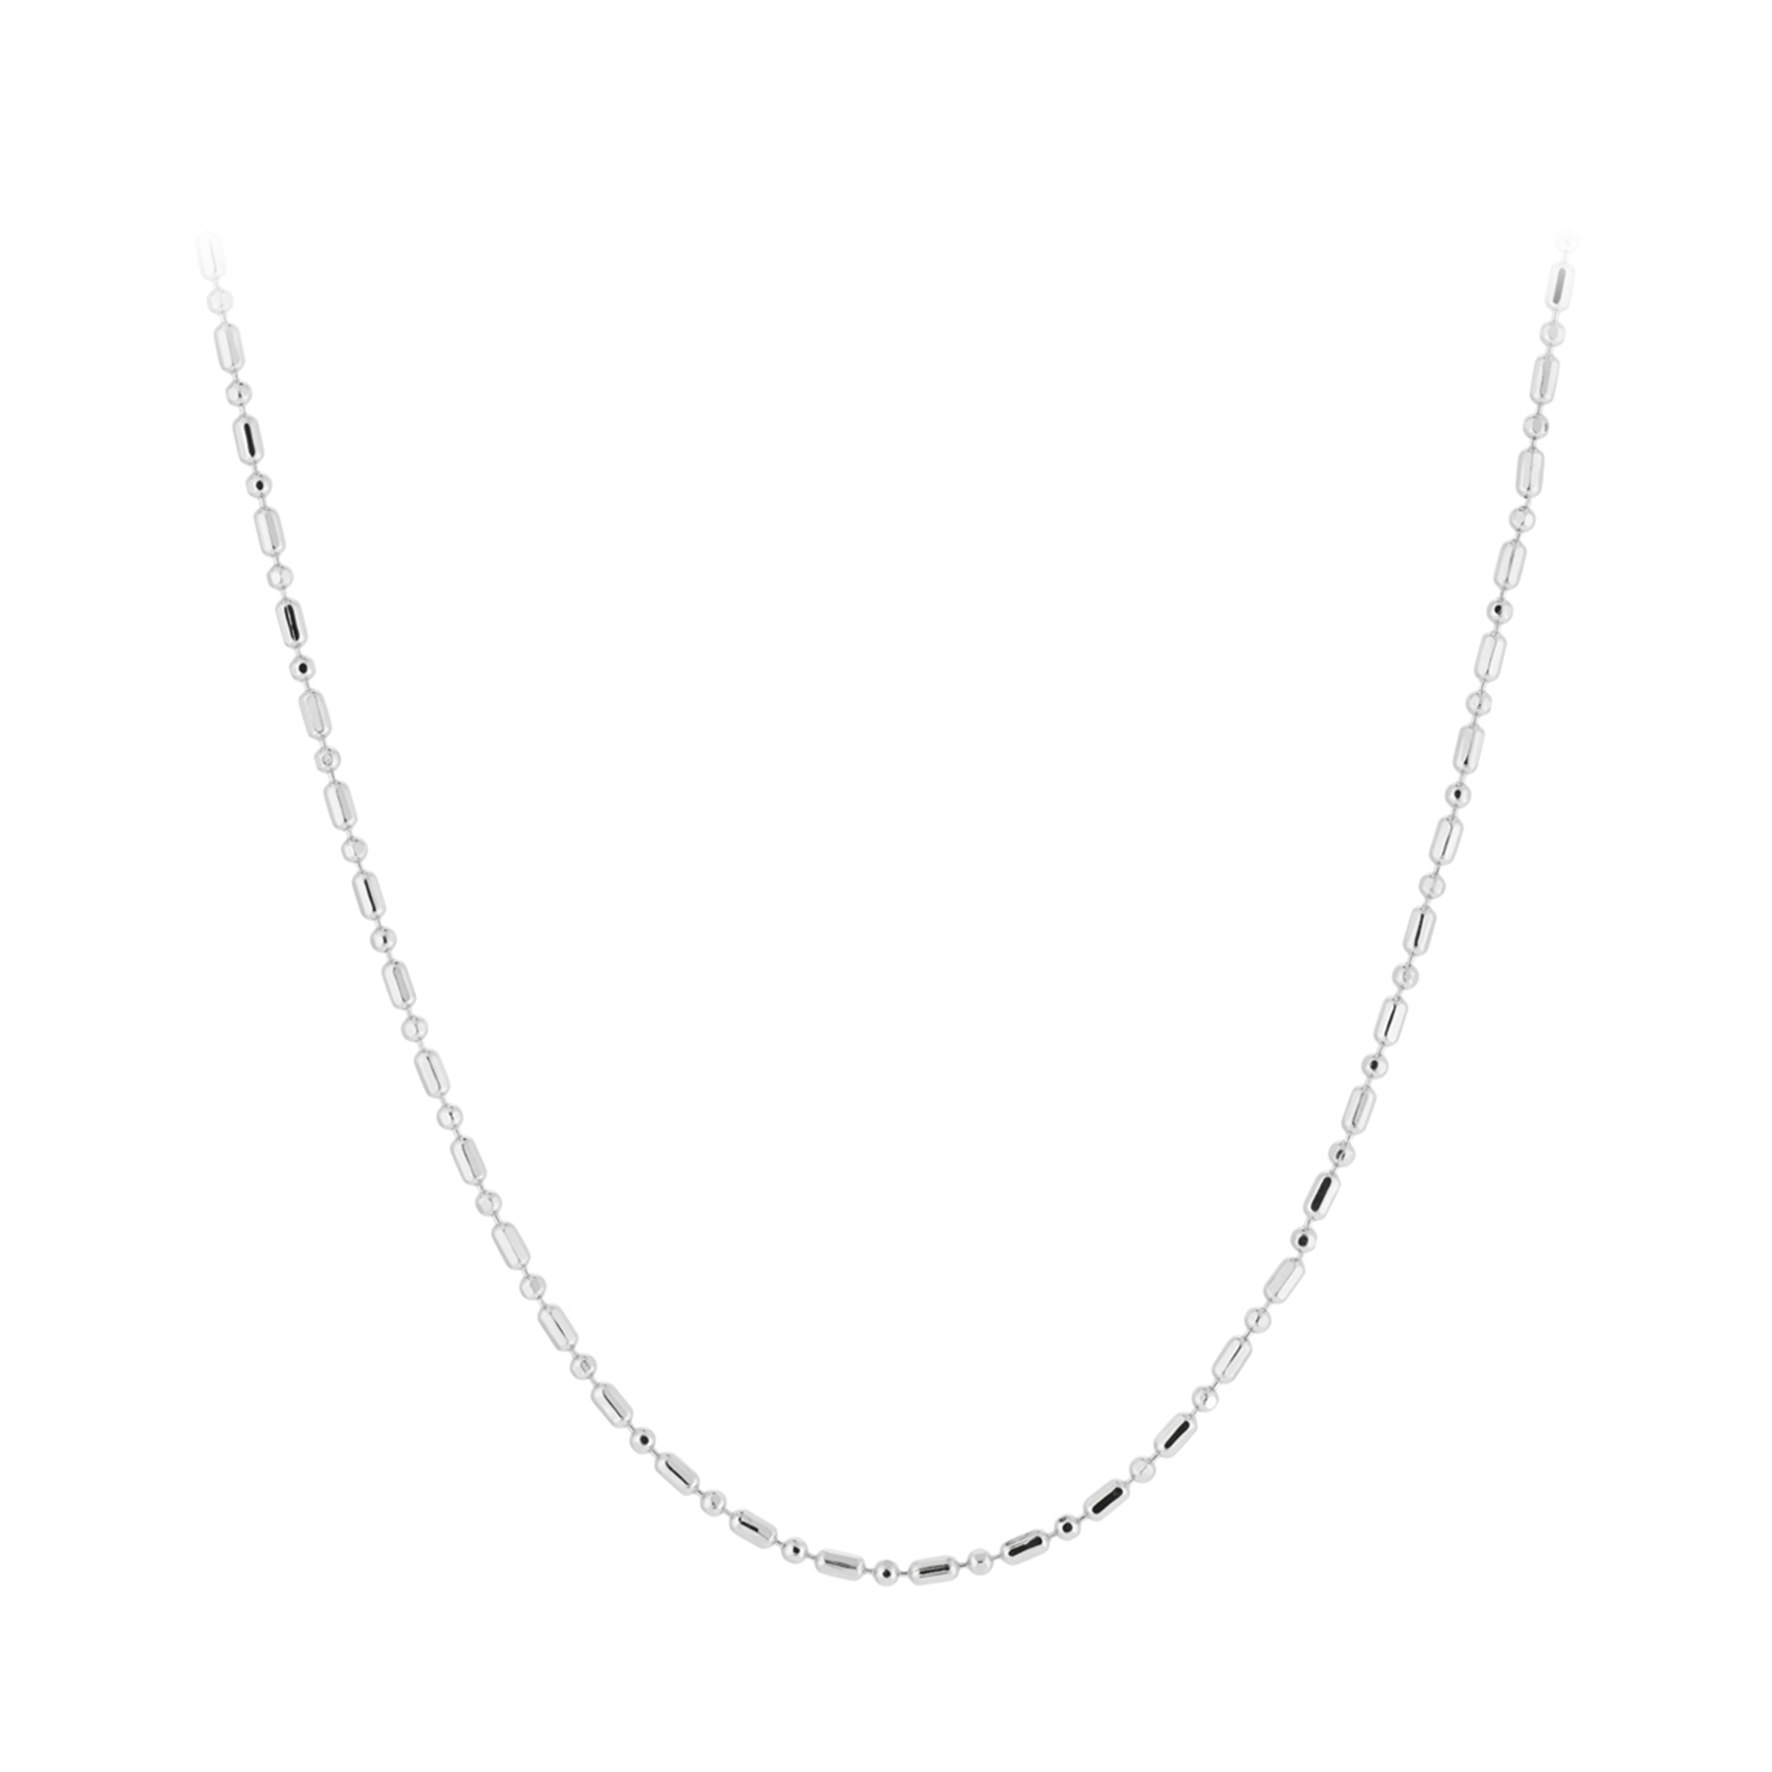 Evelyn Necklace from Pernille Corydon in Silver Sterling 925